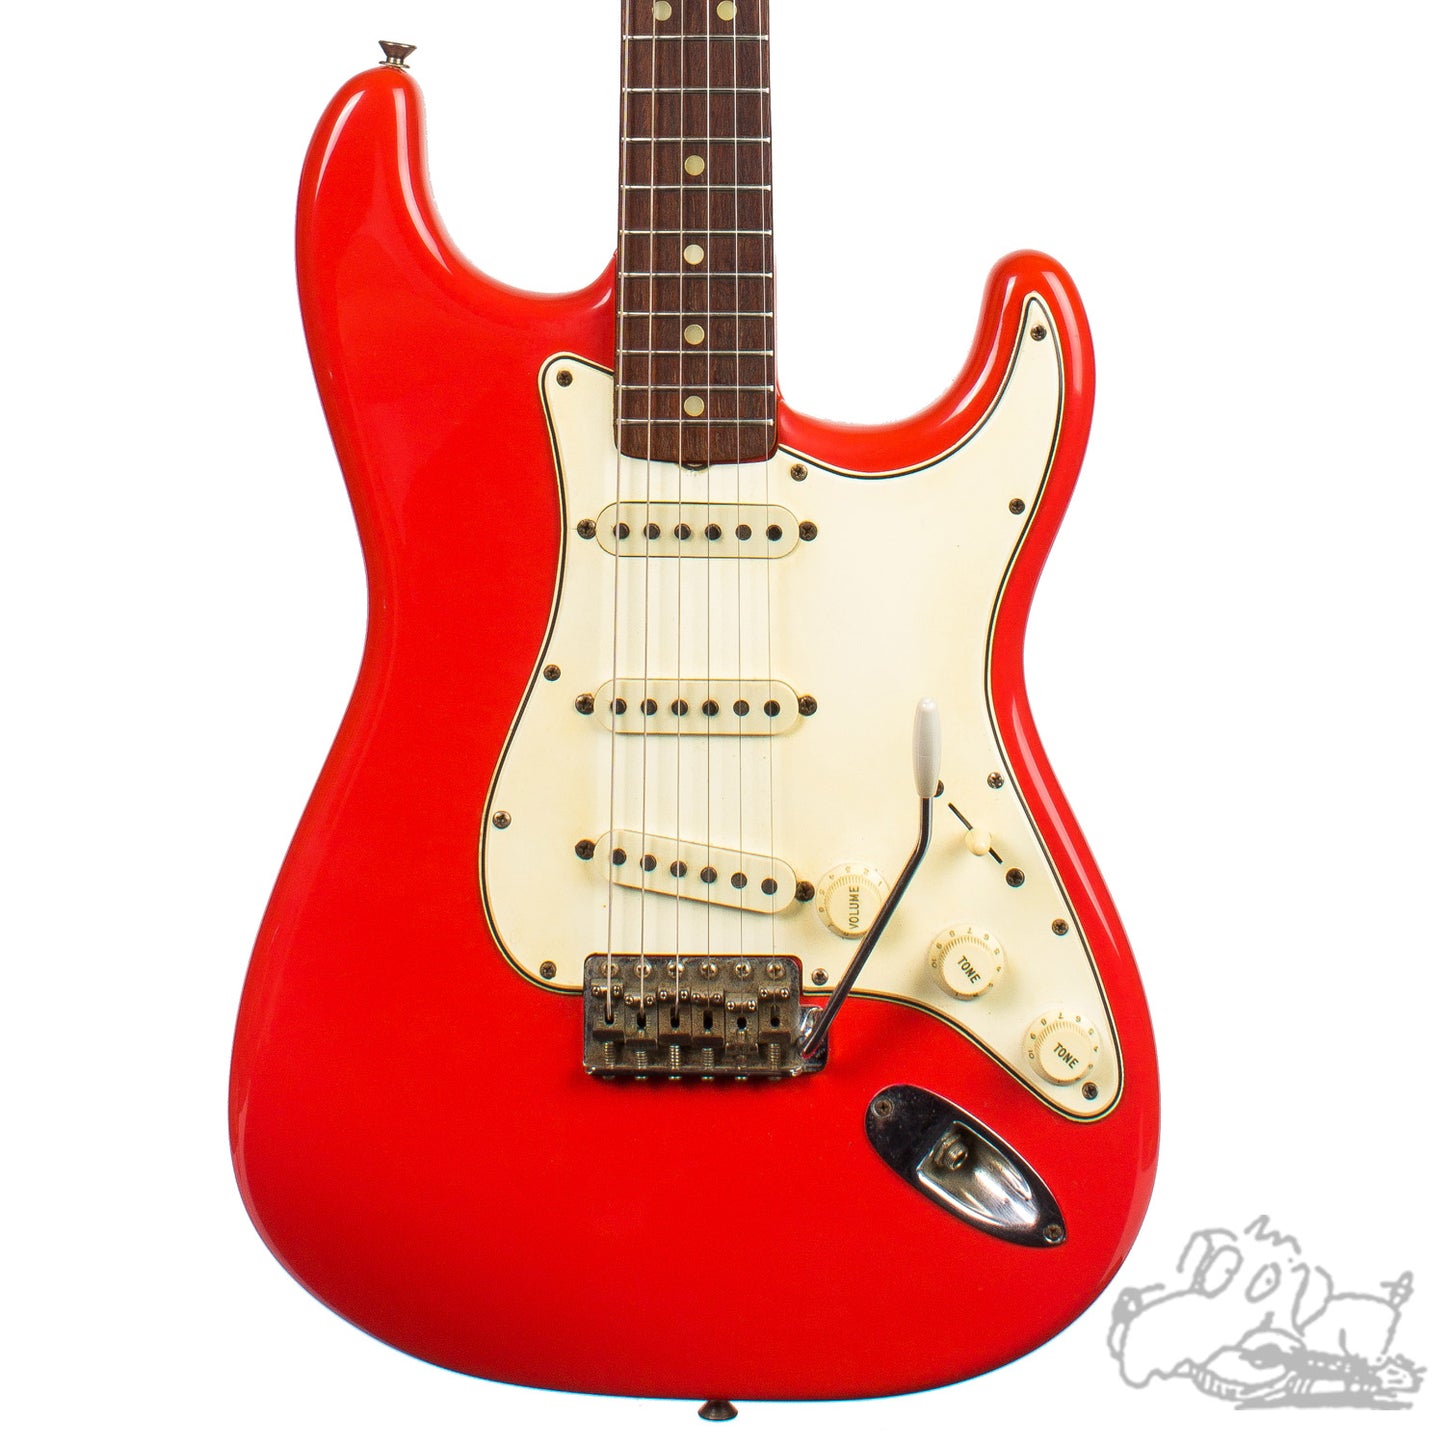 1965 Fender Stratocaster refinished in Fiesta Red